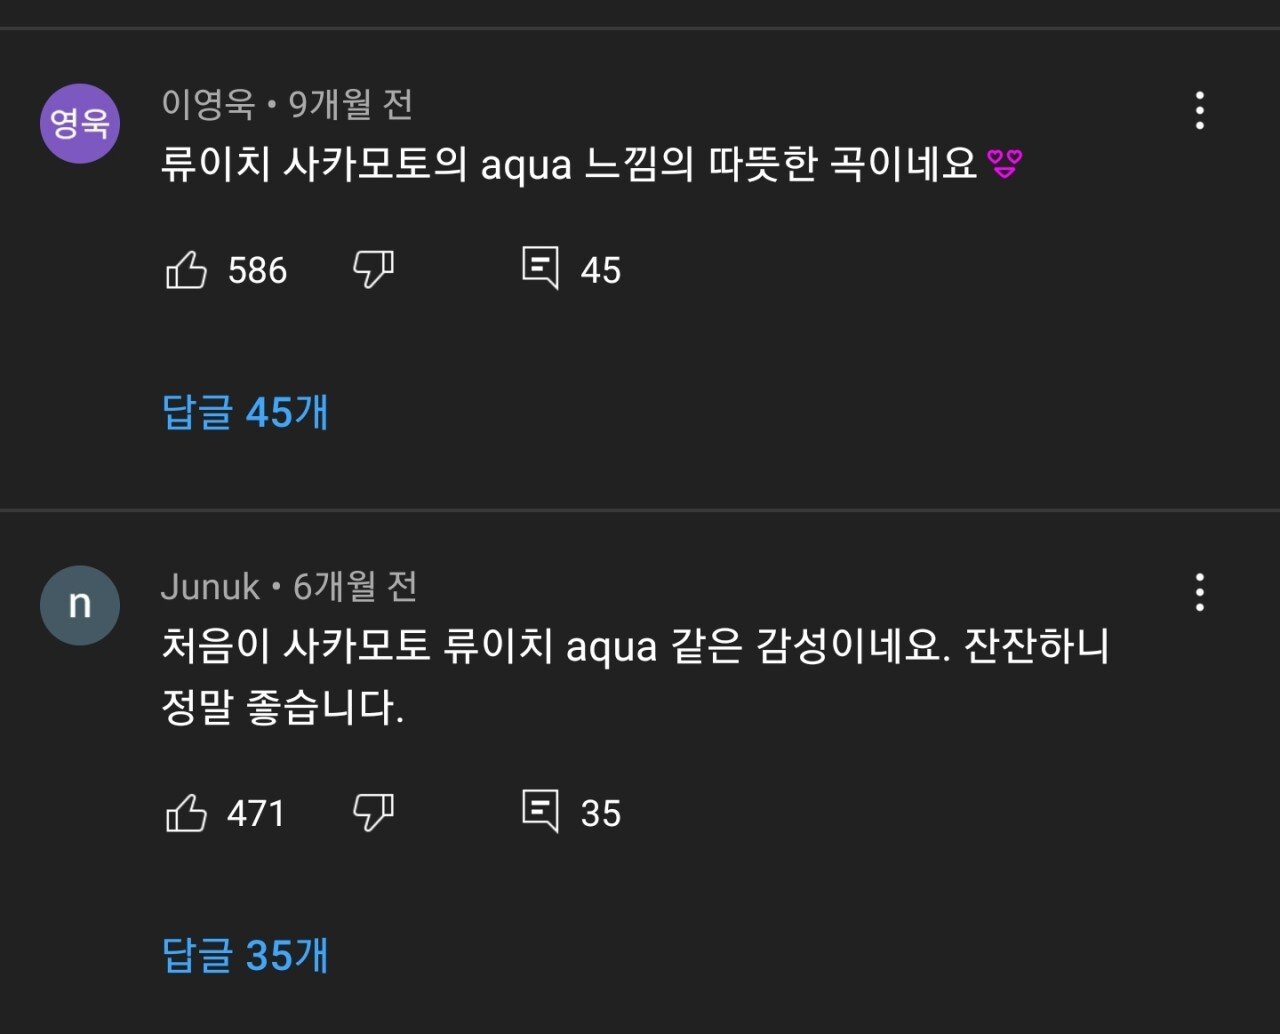 Comments predicting Yoo Hee Yeol plagiarism 9 months ago